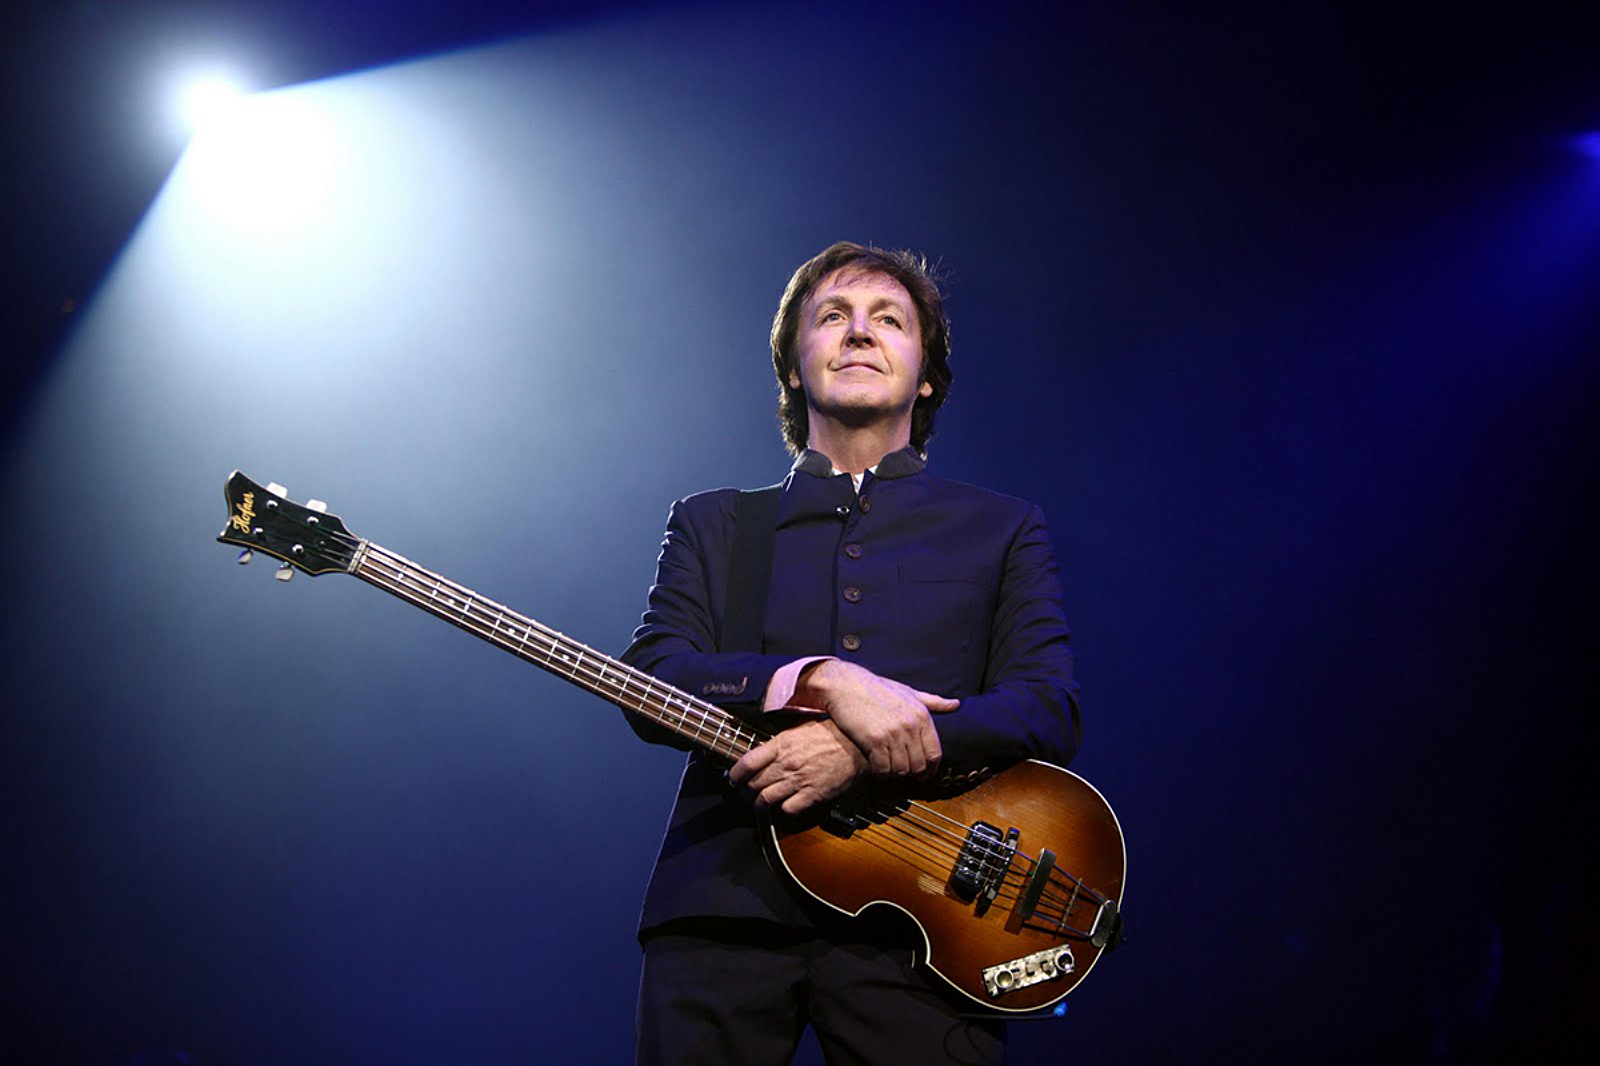 Paul McCartney teases collabs with St. Vincent, Damon Albarn, Blood Orange and more